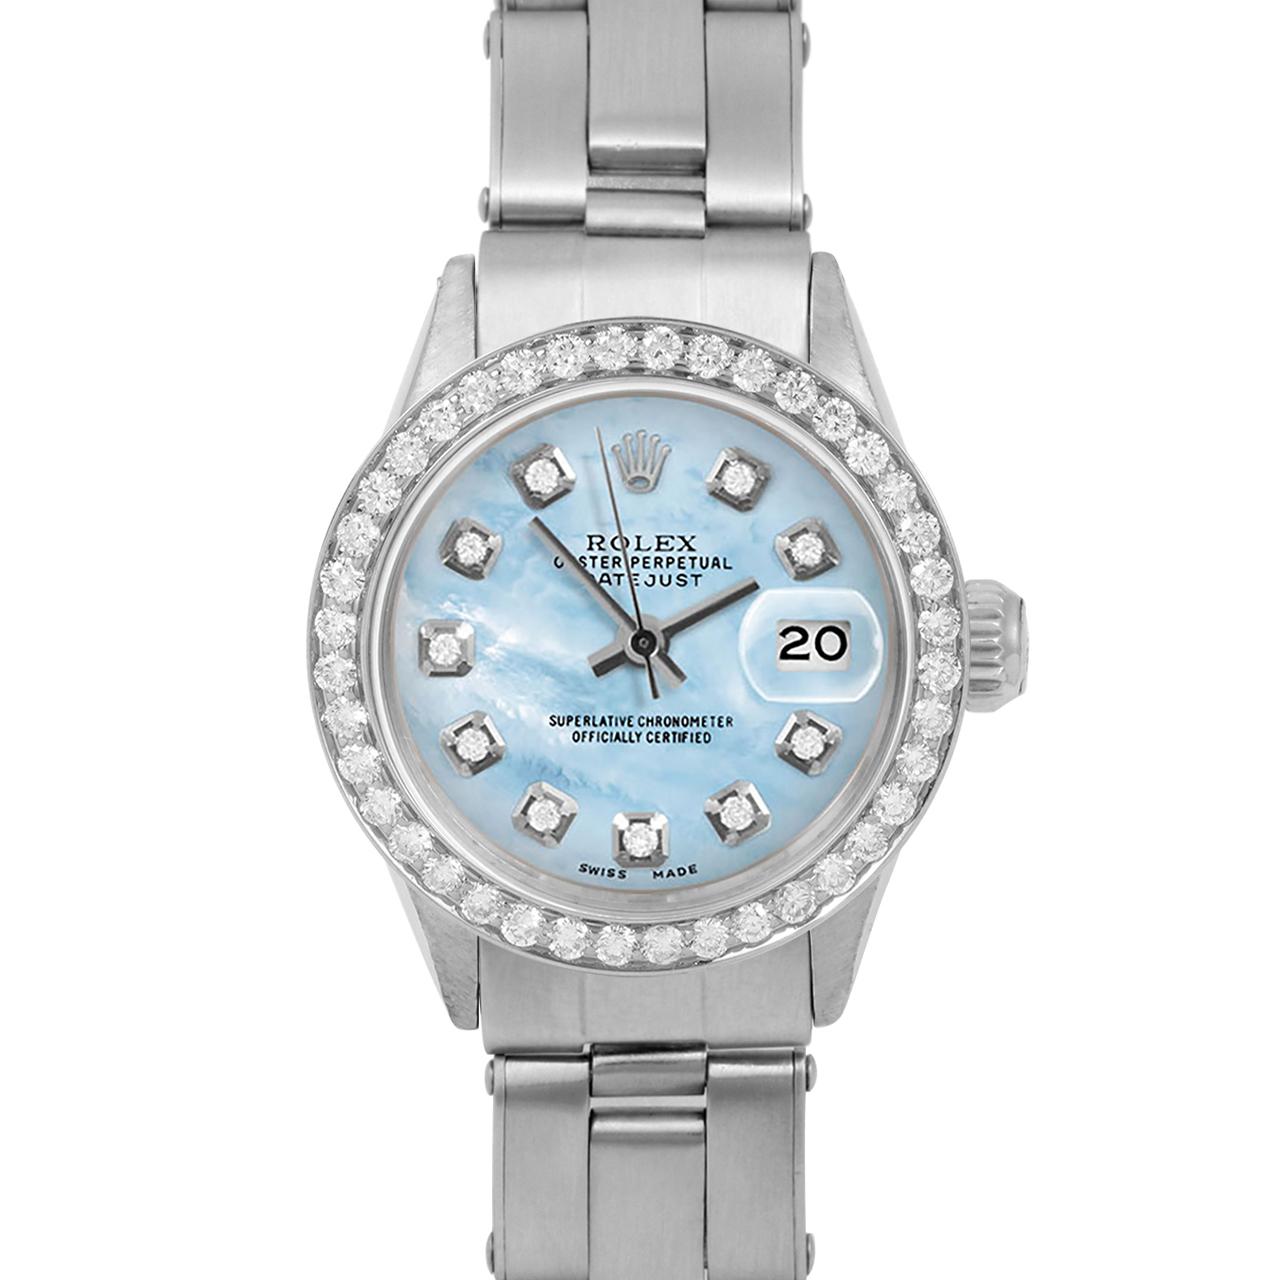 Brand : Rolex
Model : Datejust (Non-Quickset Model)
Gender : Ladies
Metals : Stainless Steel
Case Size : 24 mm
Dial : Custom Blue Mother Of Pearl Diamond Dial (This dial is not original Rolex And has been added aftermarket yet is a beautiful Custom